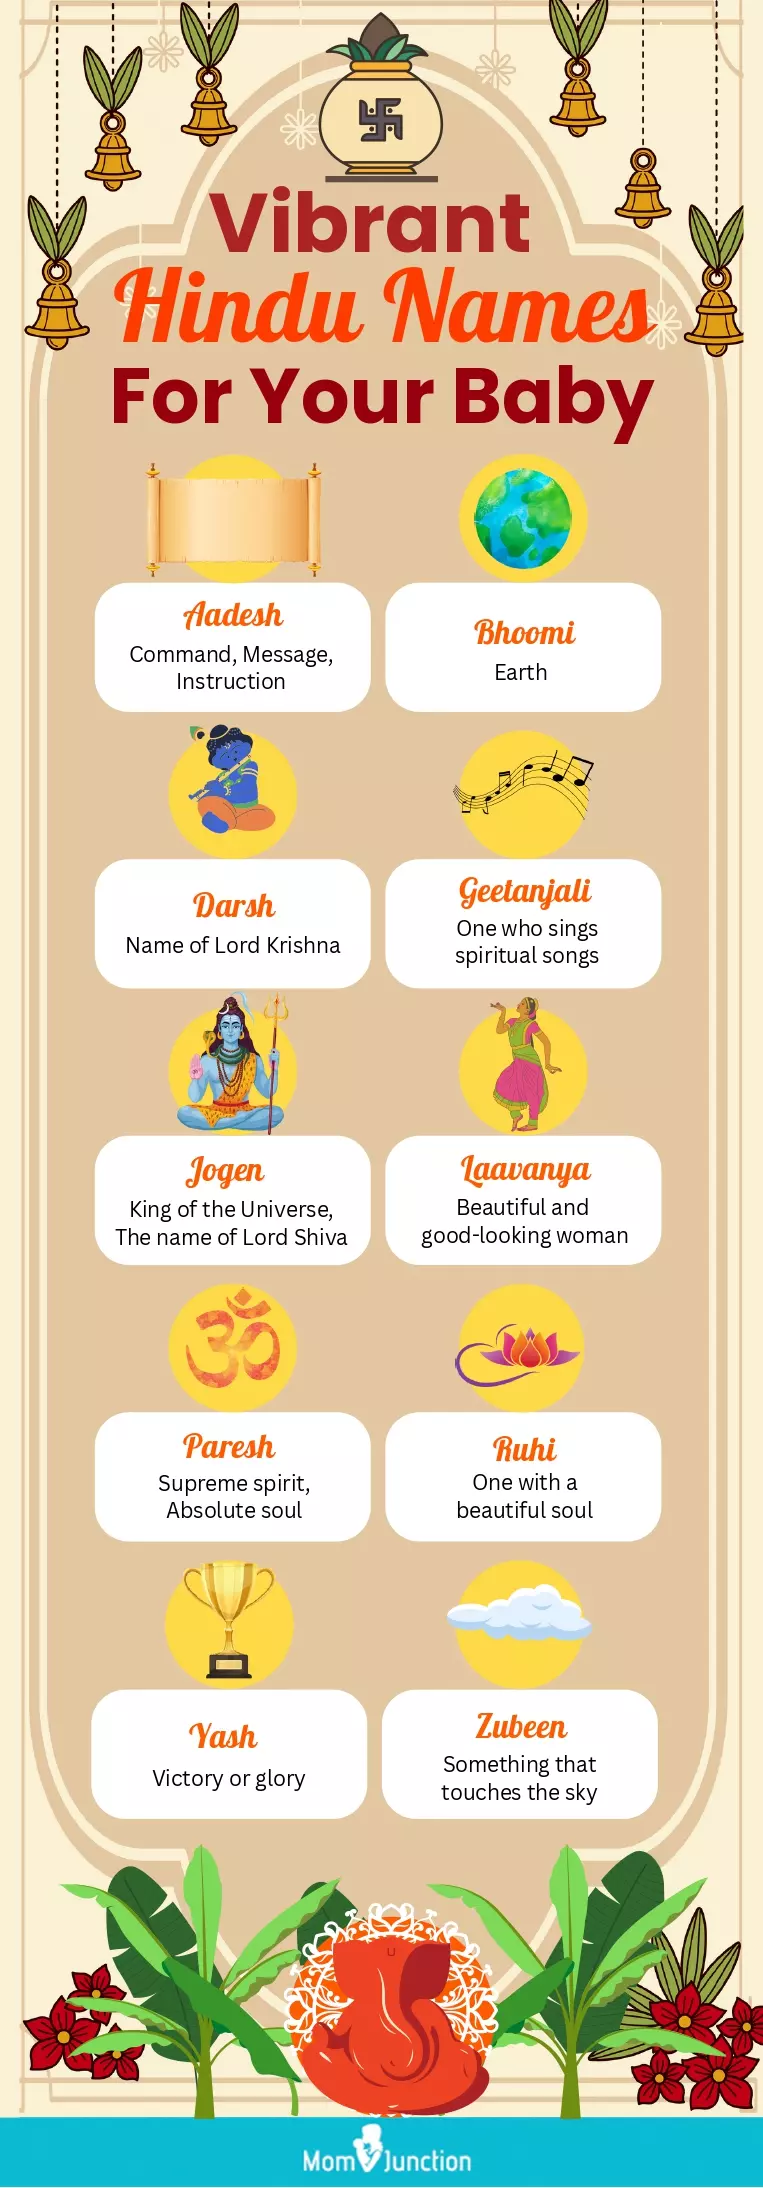 vibrant hindu names for your baby (infographic)